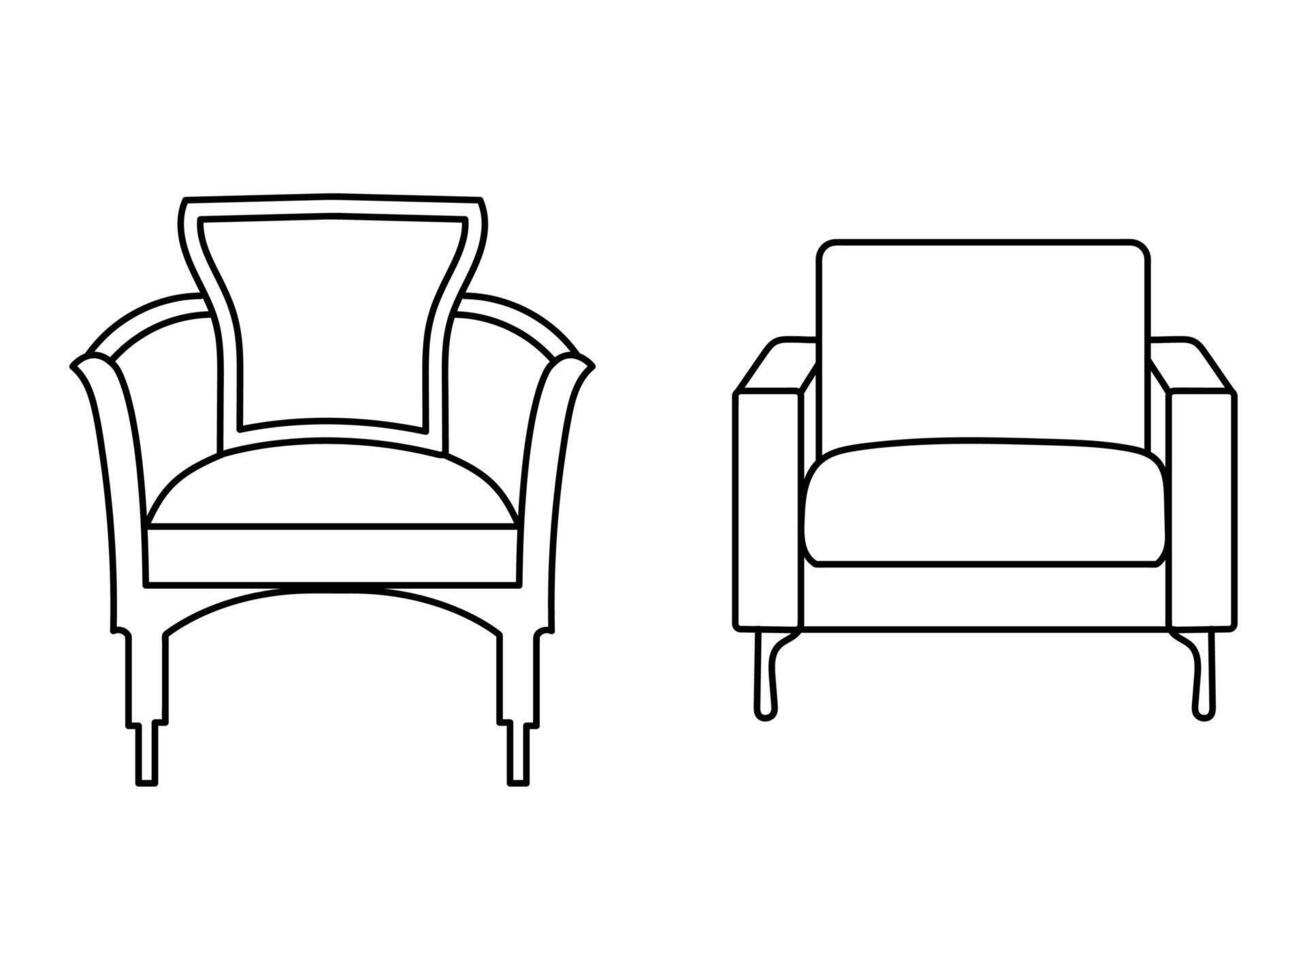 Modern furniture armchair home, Continuous line drawing executive office chair concept, sofa chair vector illustration